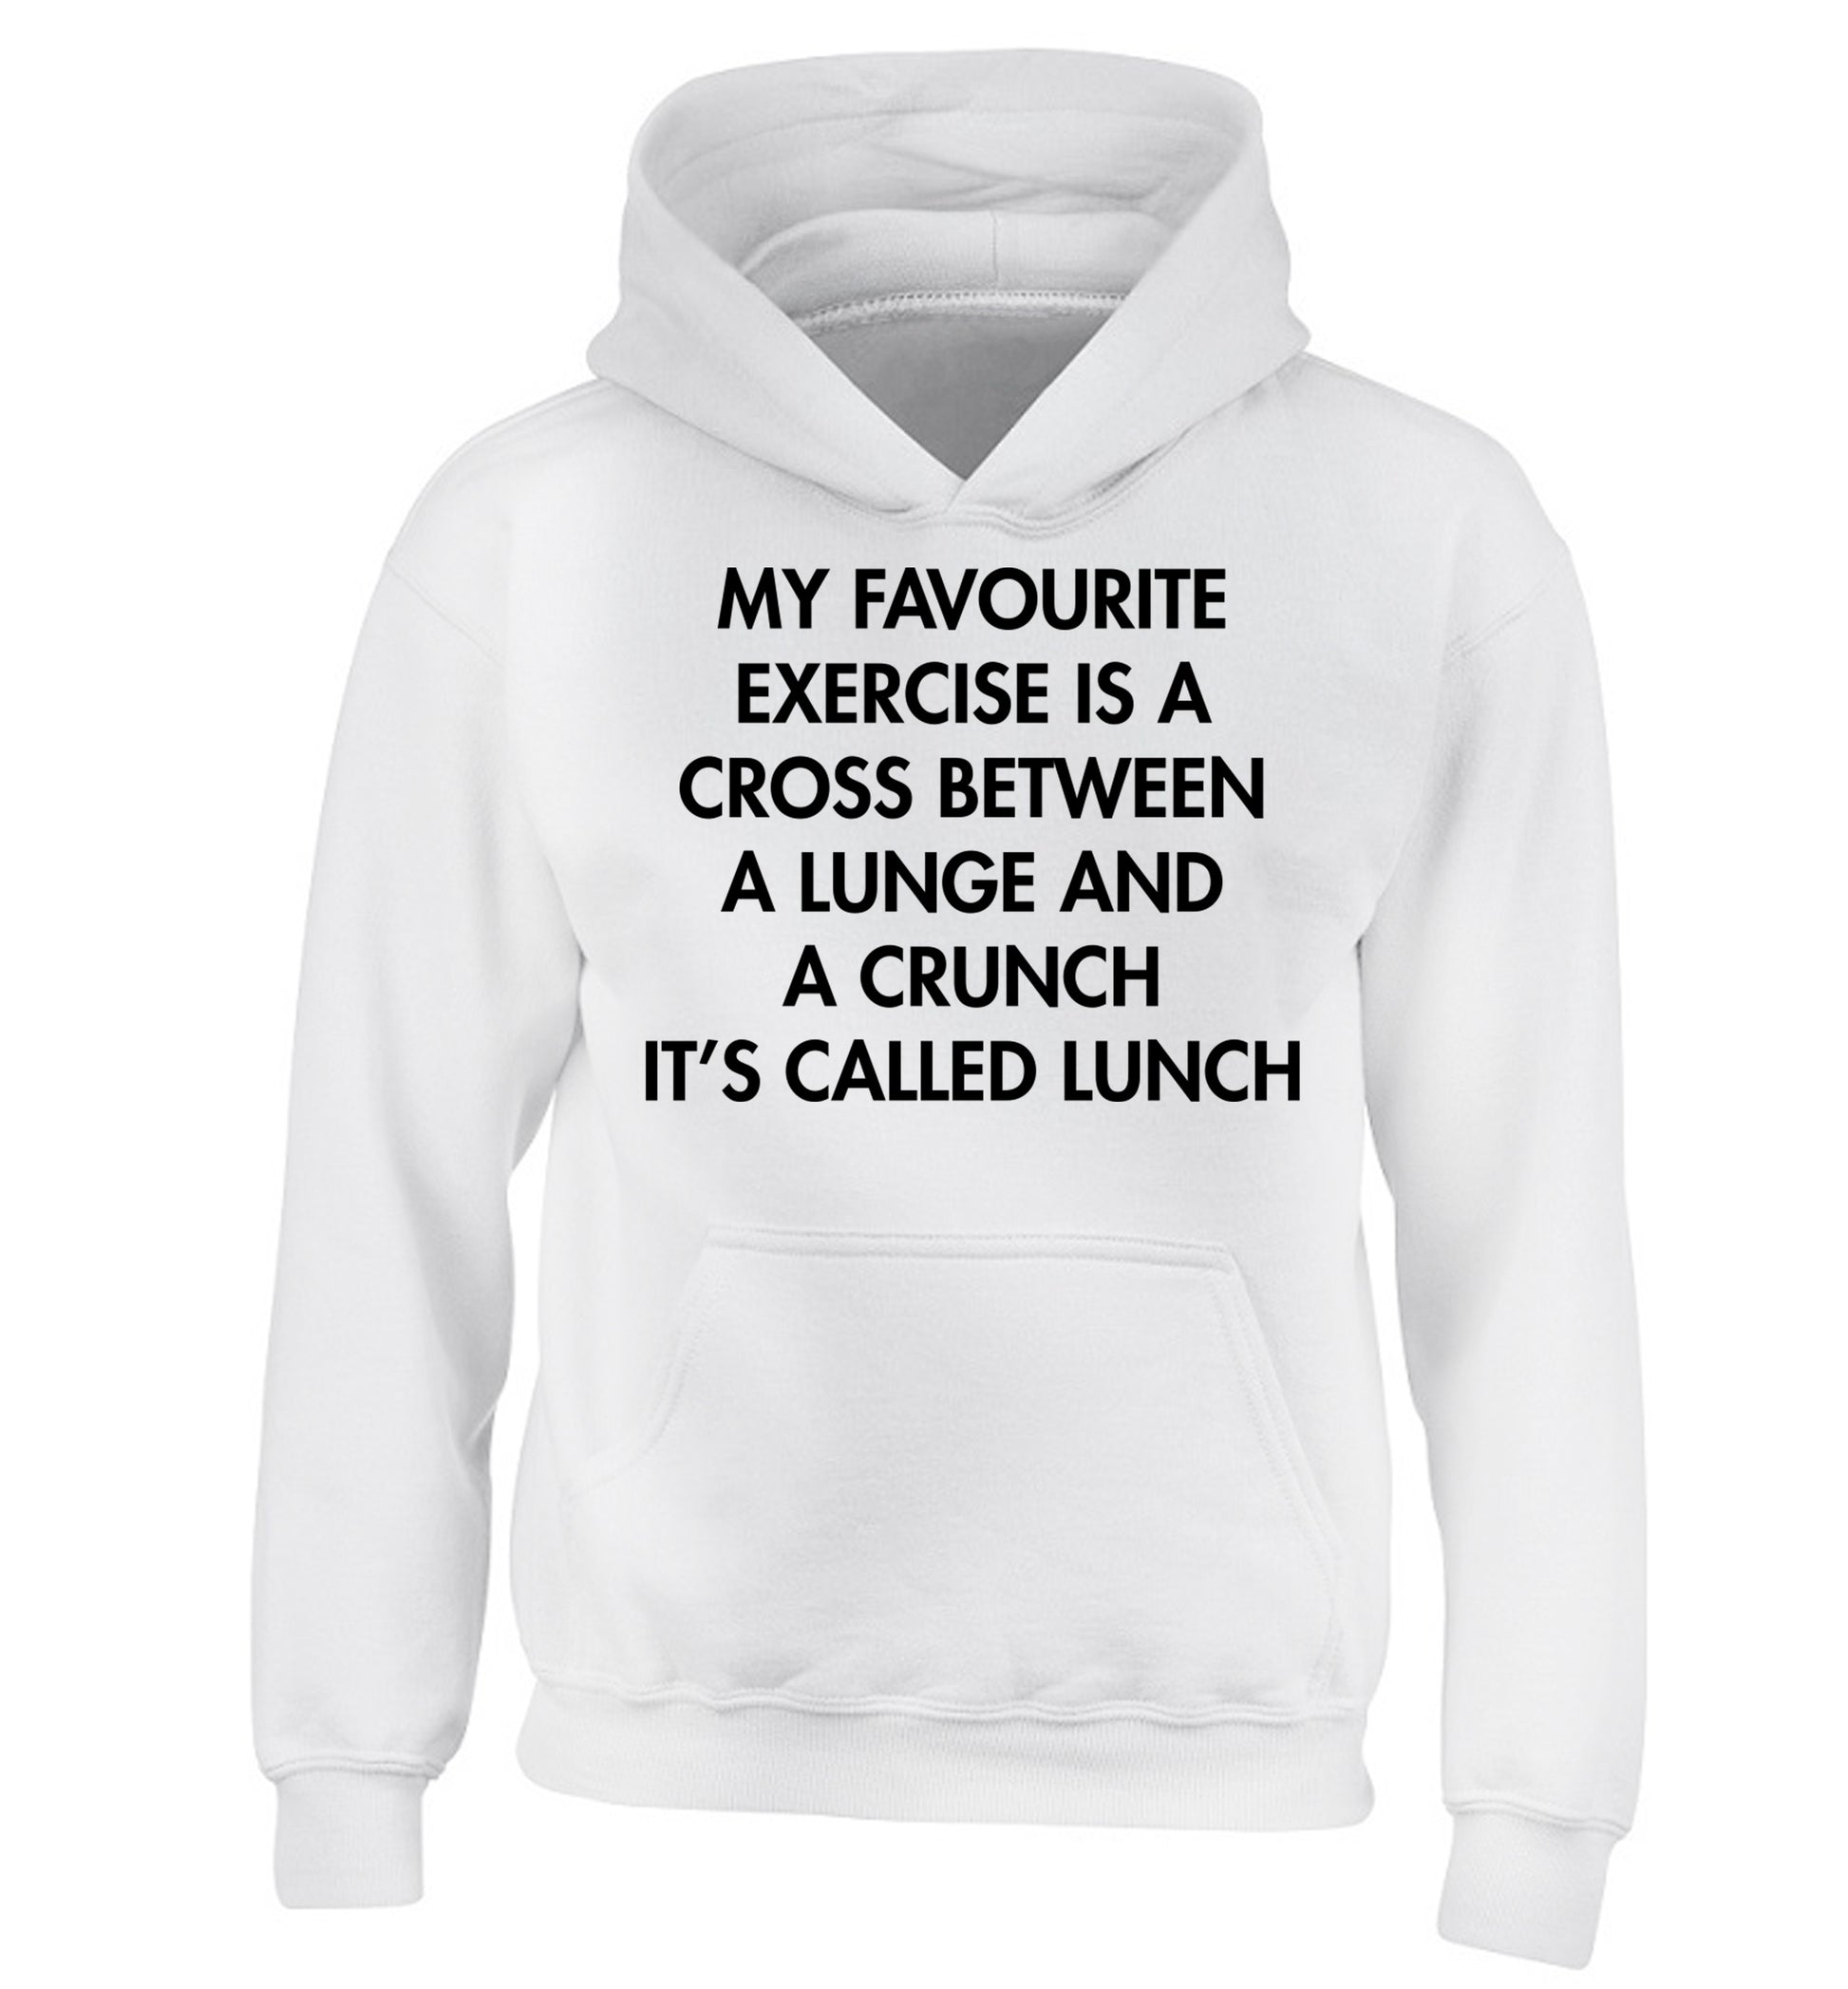 My favourite exercise is a cross between a lung and a crunch it's called lunch children's white hoodie 12-14 Years